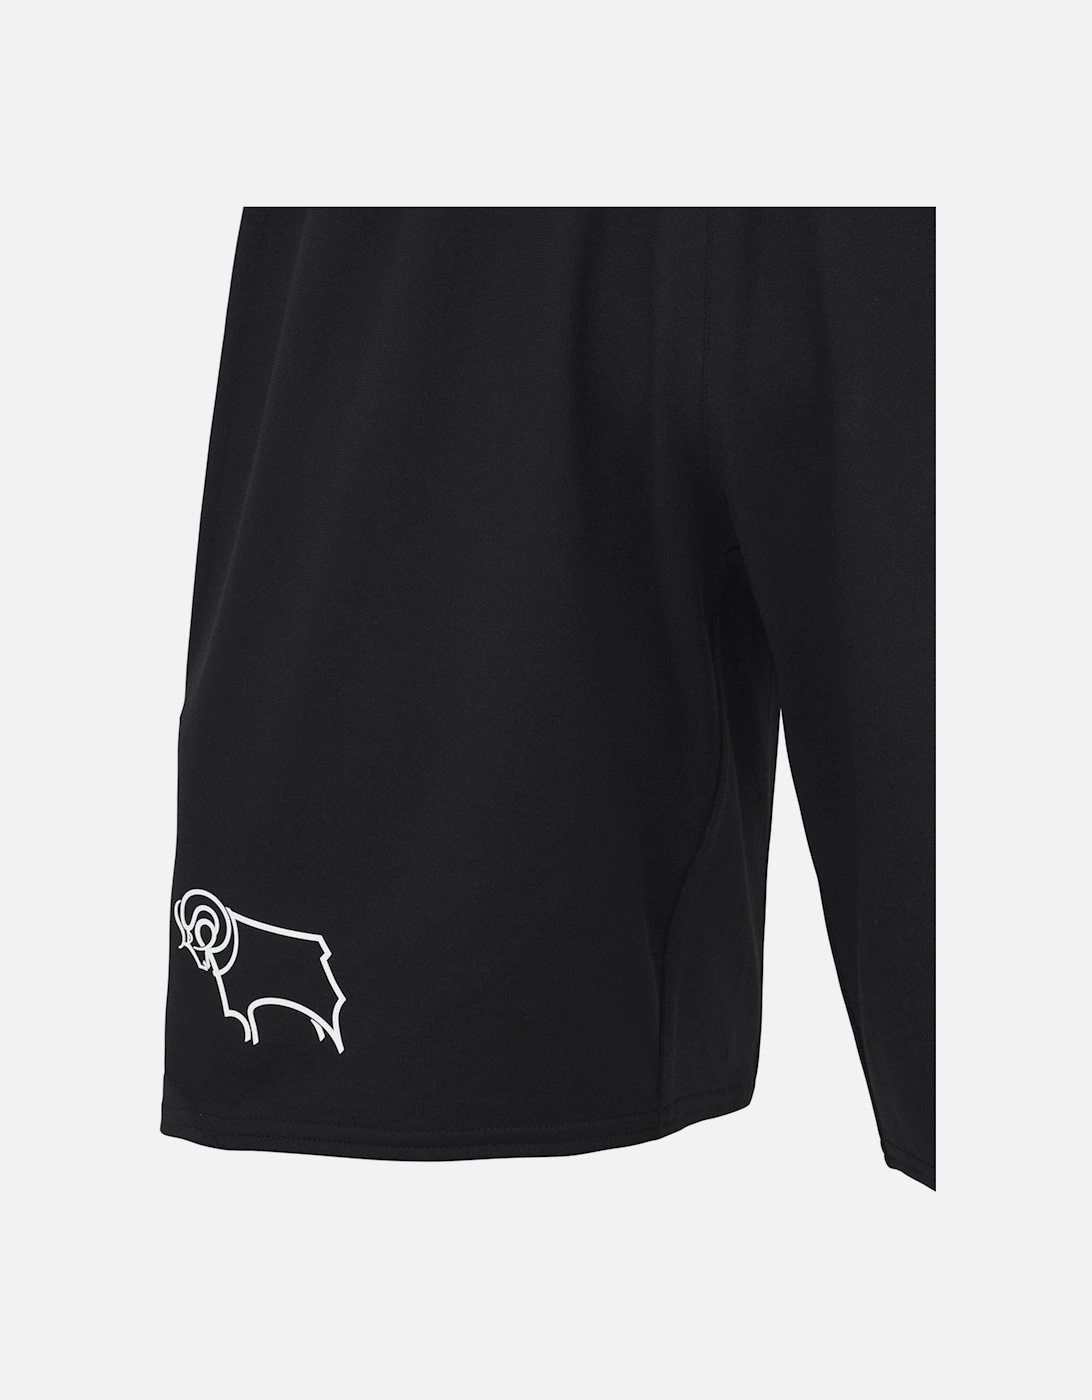 Derby County FC Childrens/Kids 22/23 Home Shorts